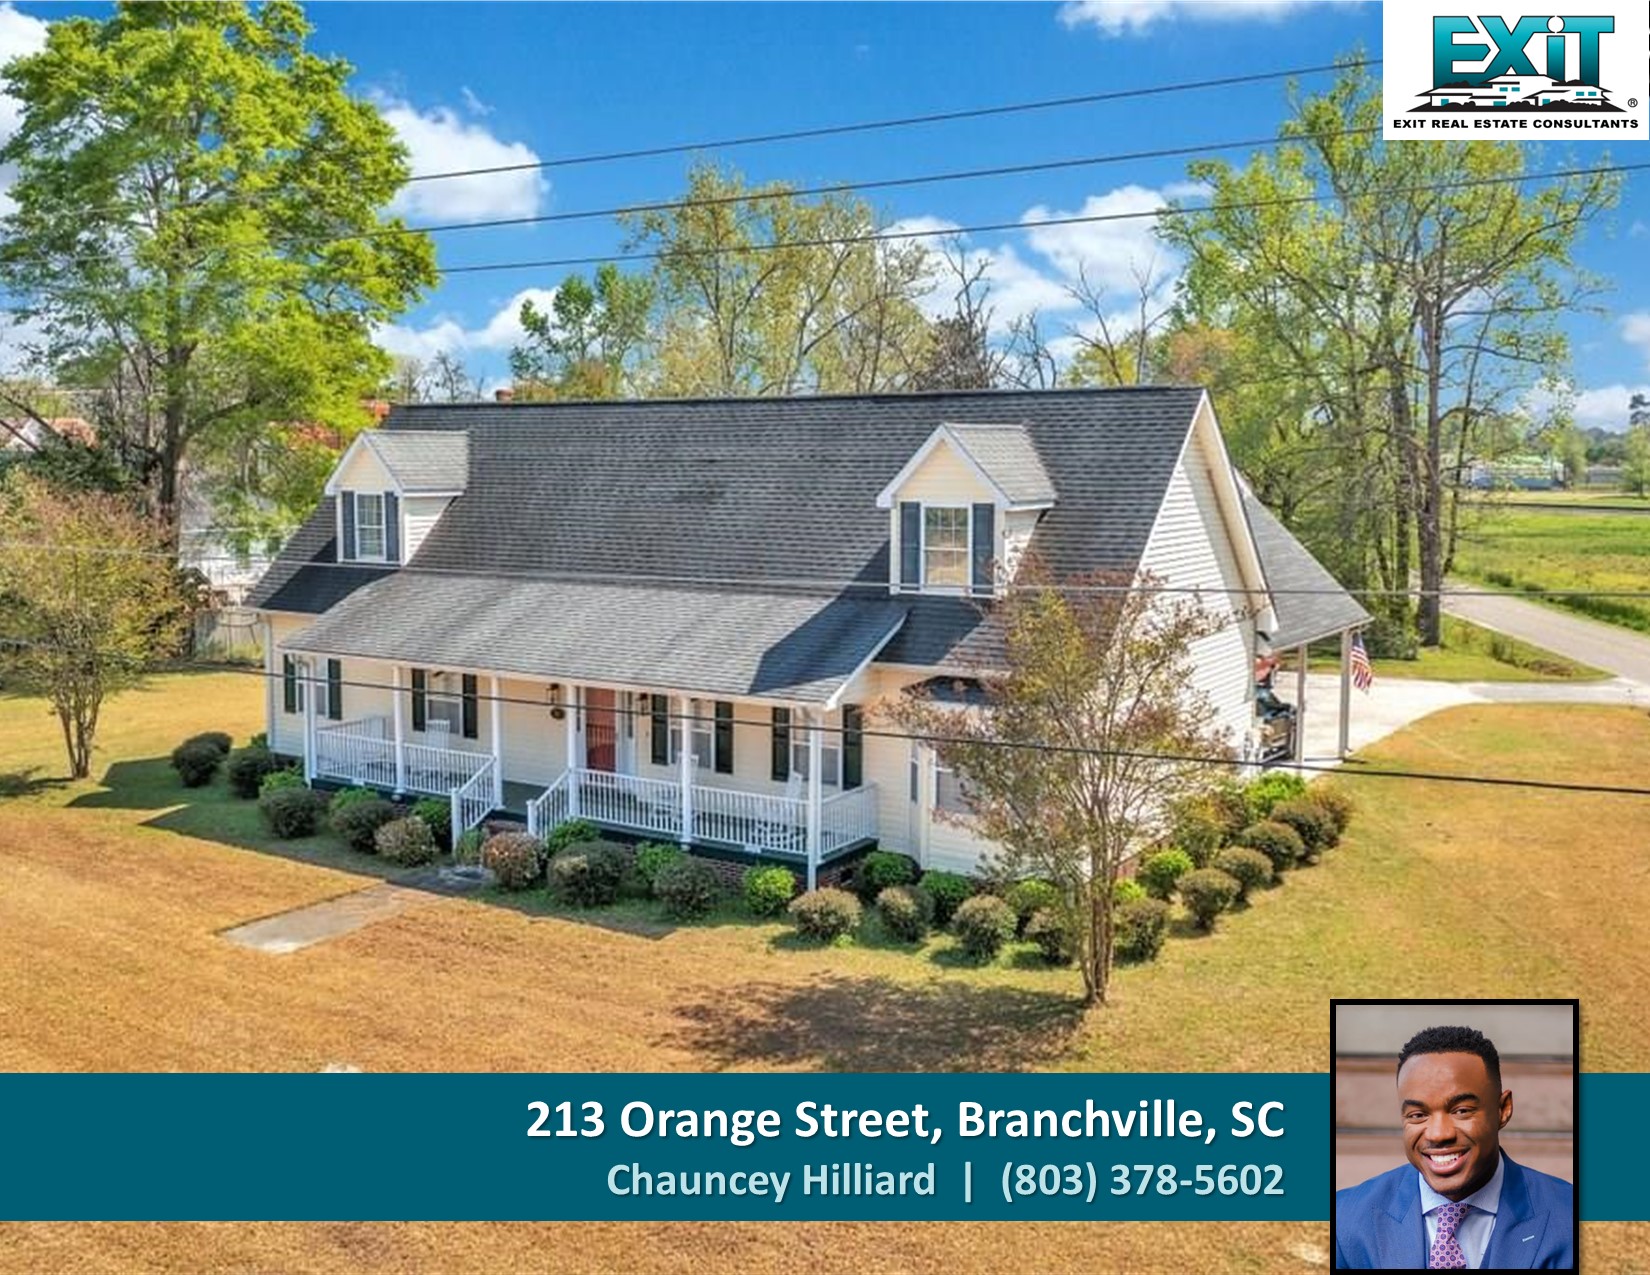 Just listed in Branchville